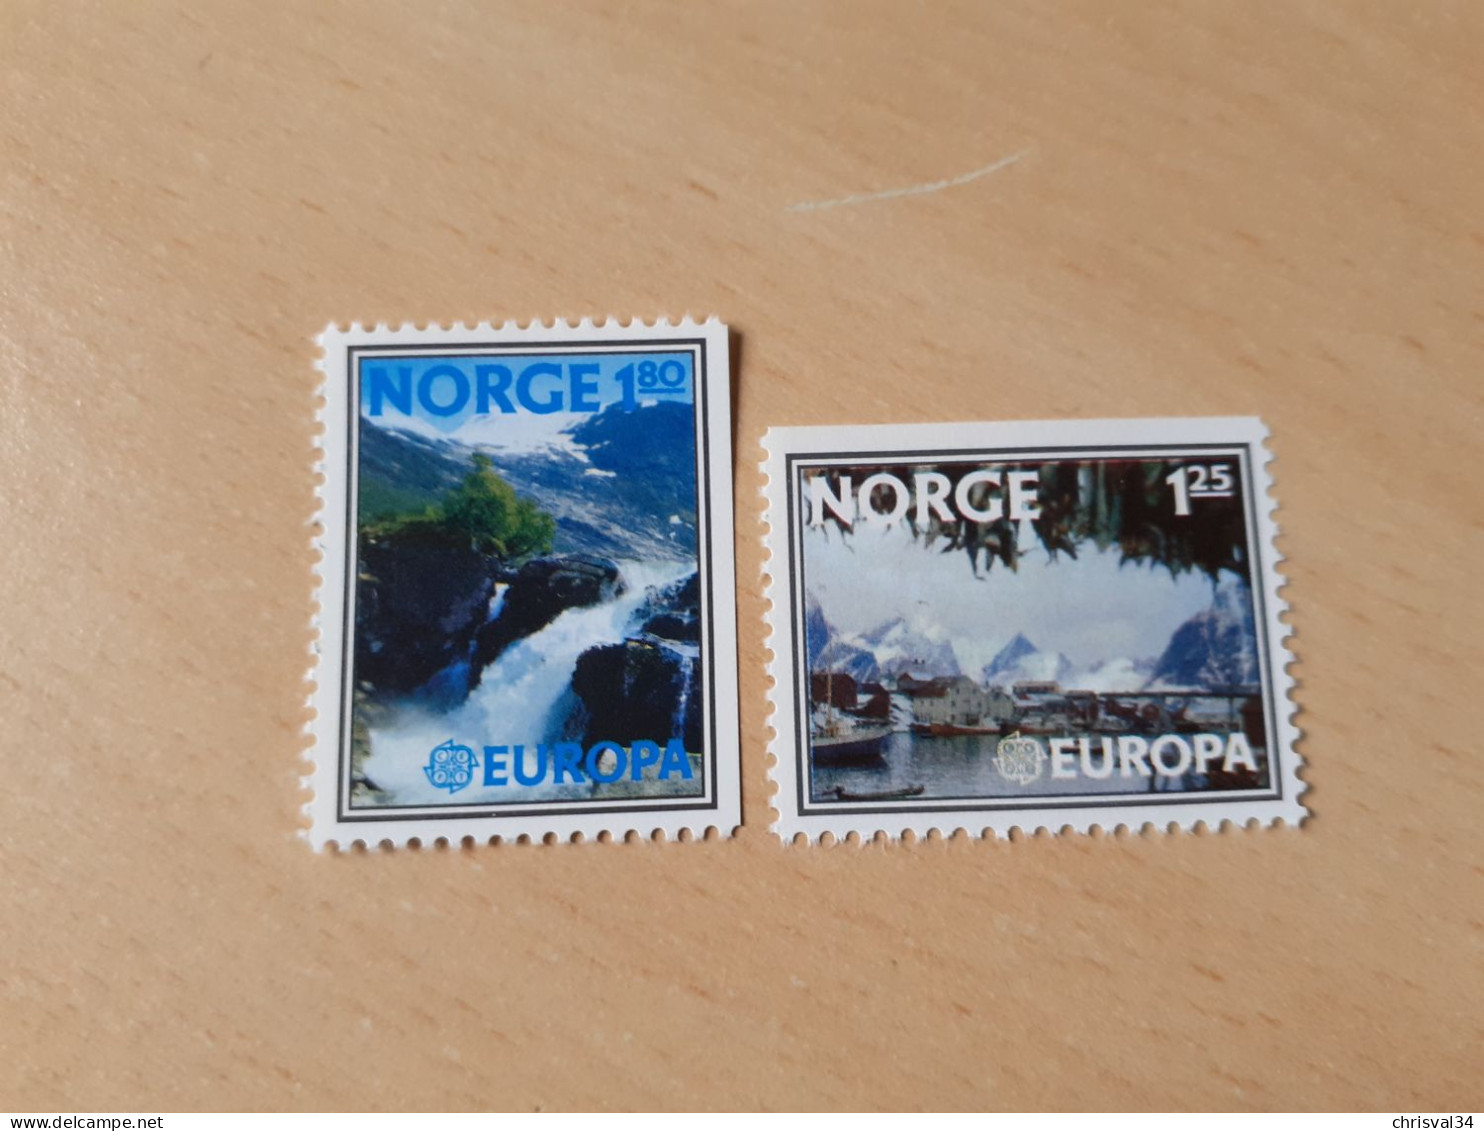 TIMBRES   NORVEGE   ANNEE    1977   N  698a  +  699a   COTE  5,50  EUROS   NEUFS  LUXE** - Unused Stamps